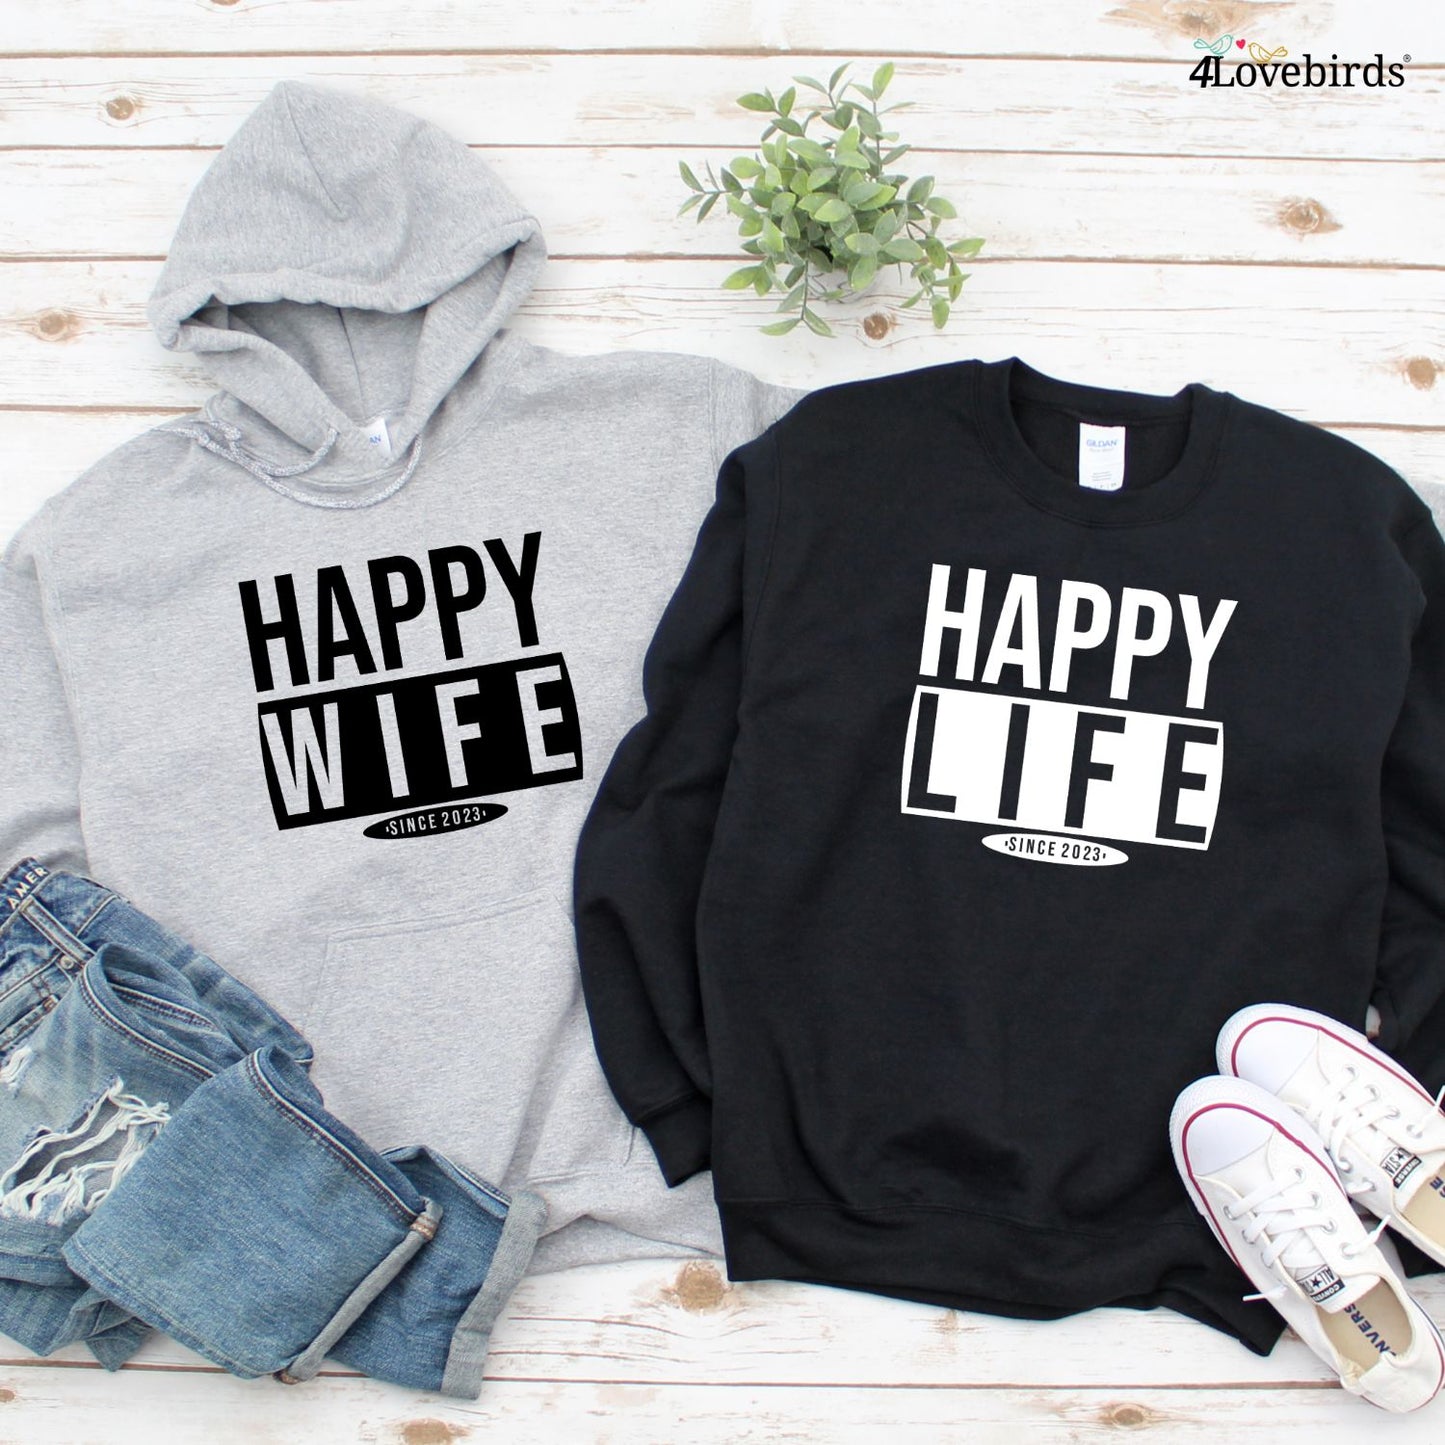 Happy Wife Happy Life Couple Matching Hoodie, Vow renewal ceremony. Hubby Wifey Anniversary / Wedding Custom Gift. Relationship Announcement